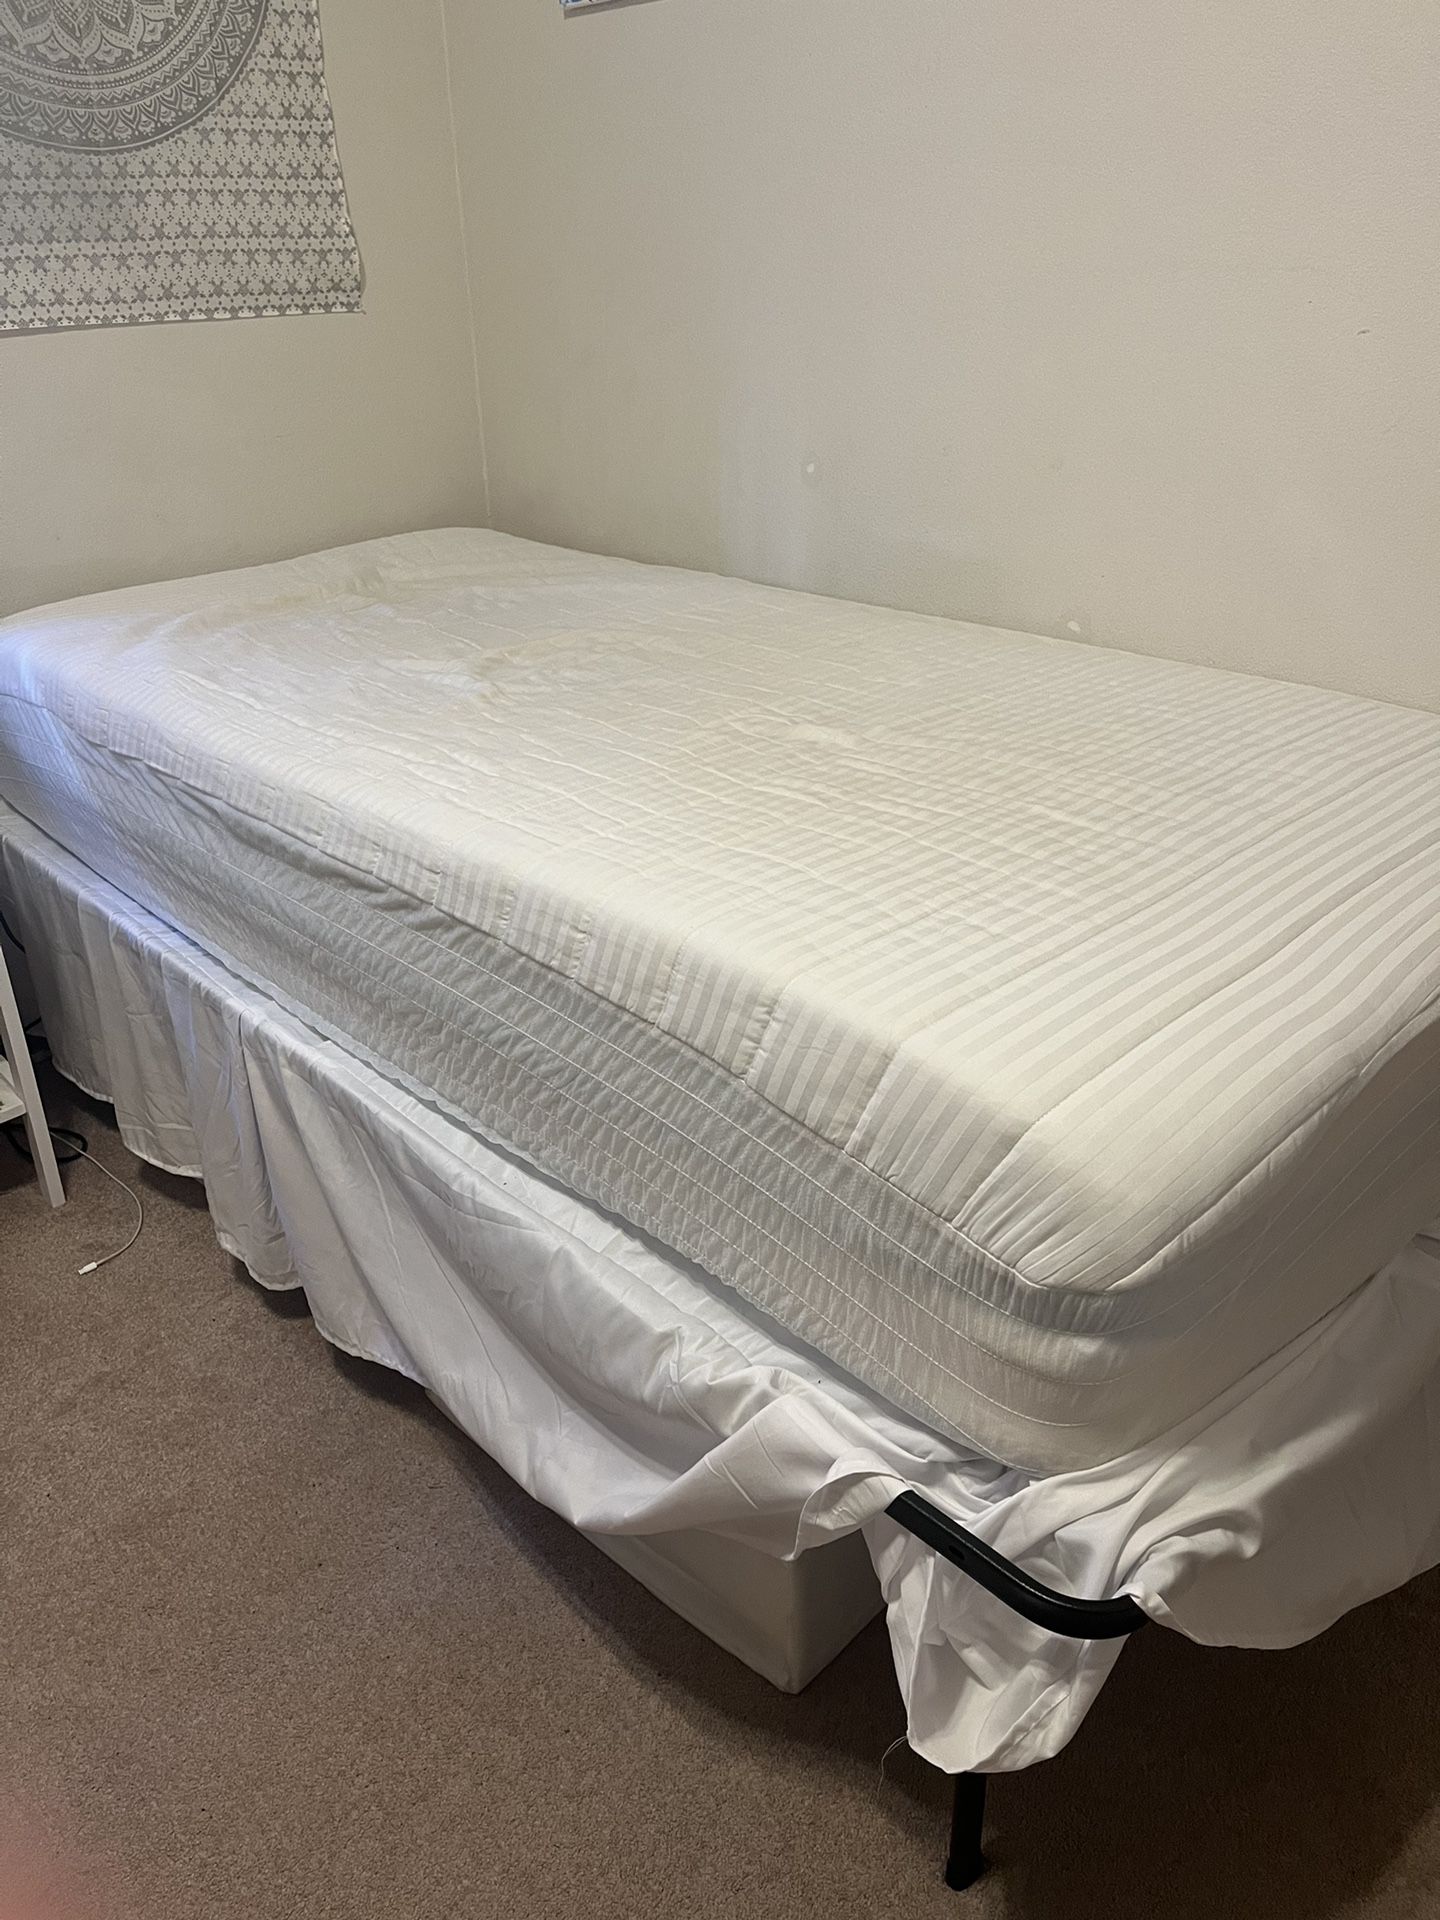  Twin XL foldable bed frame, mattress and topper